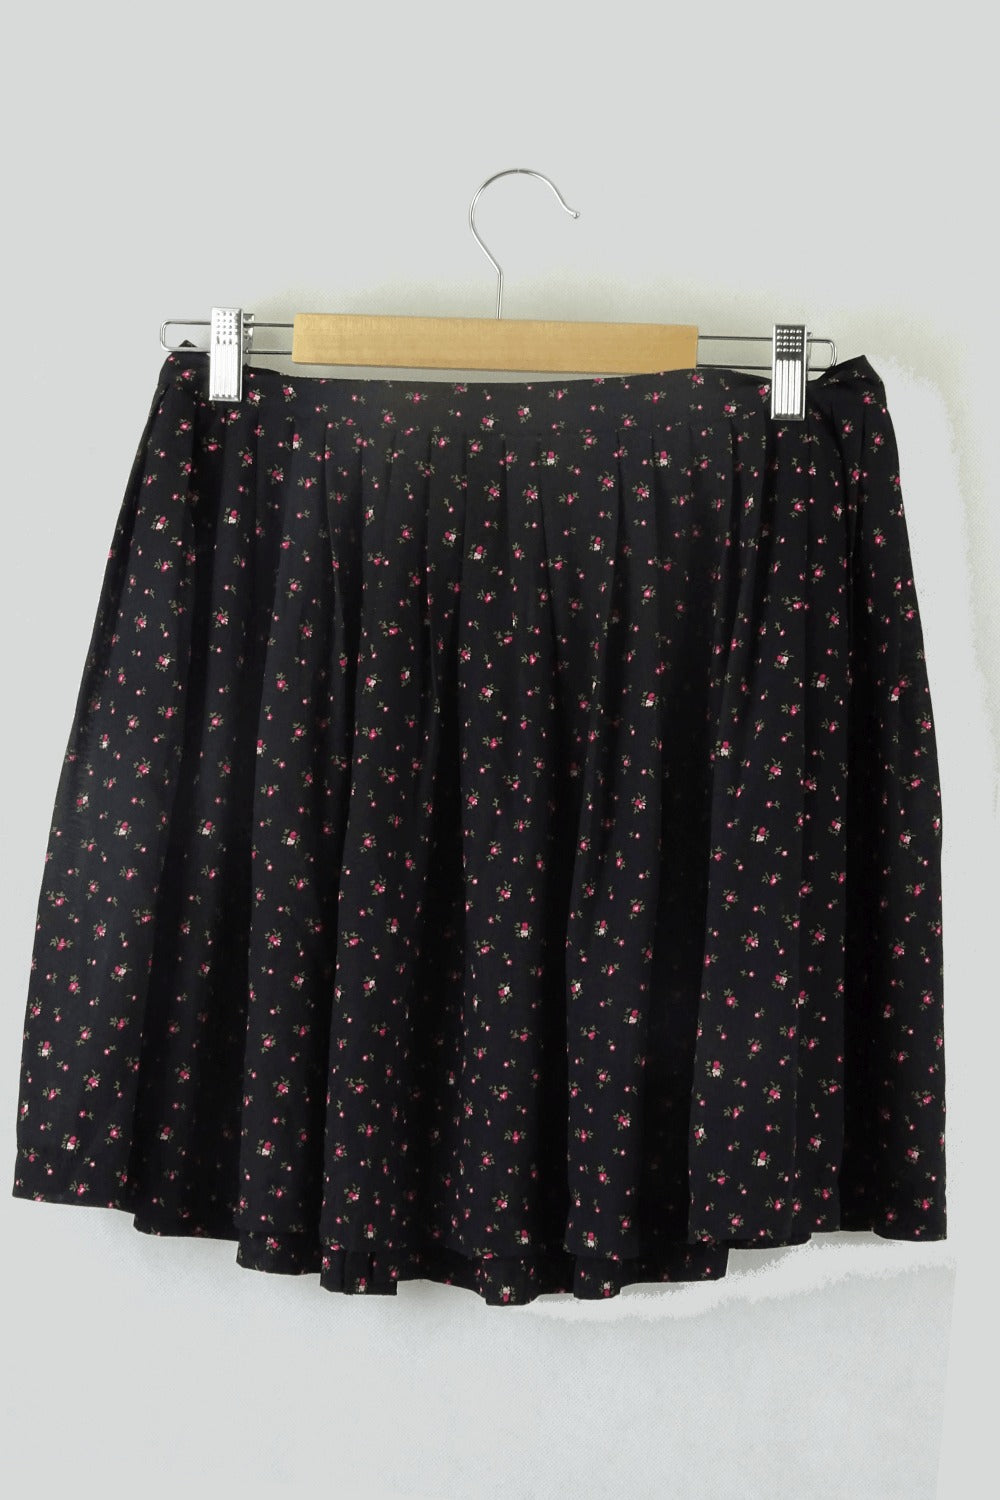 Quirky Circus Floral and Black Skirt 14